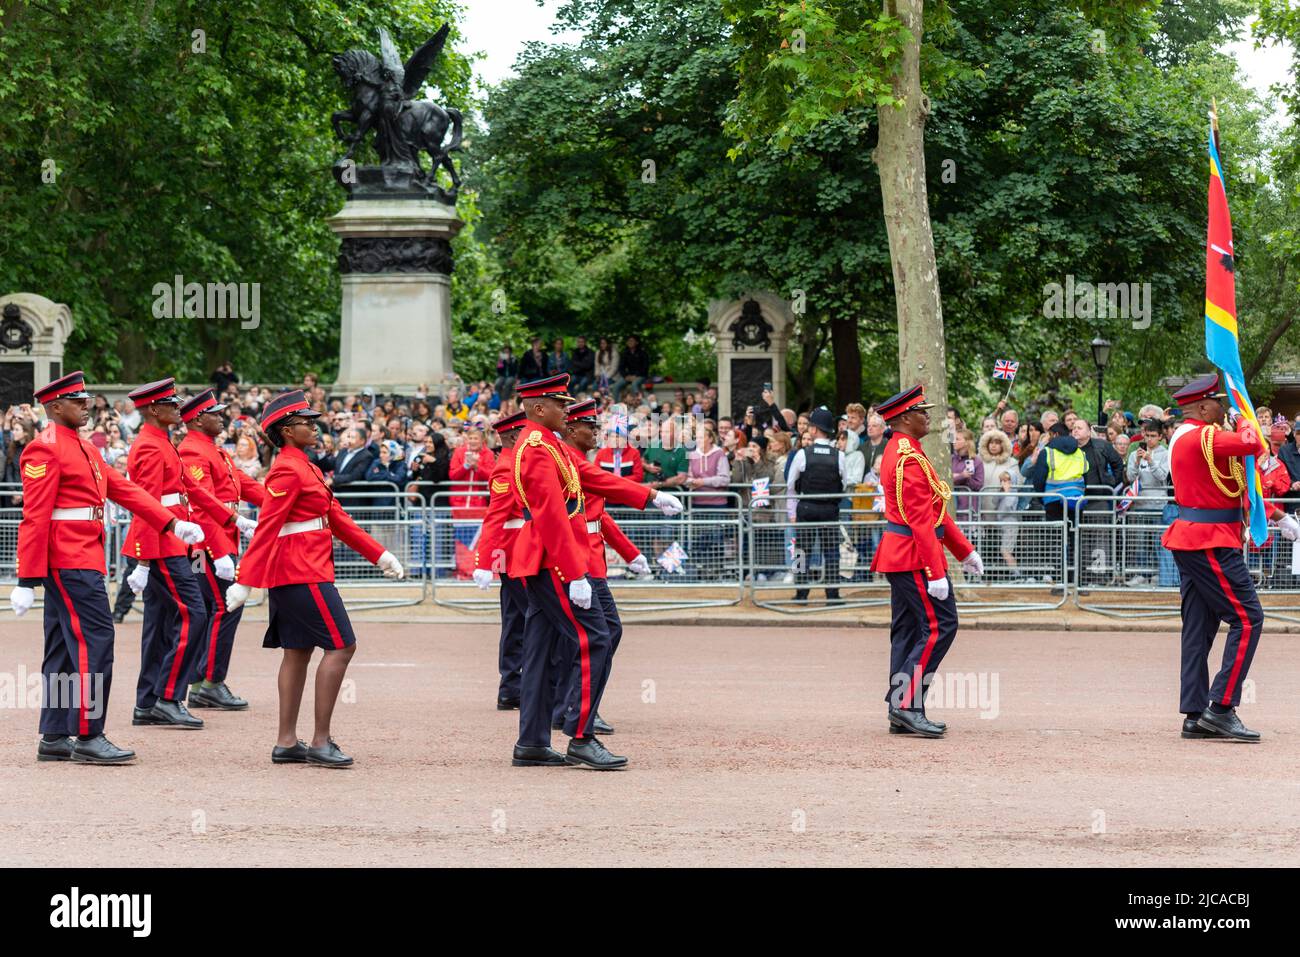 Eswatini group marching in the Commonwealth section of the For Queen and Country act of Platinum Jubilee Pageant, The Mall, London Stock Photo